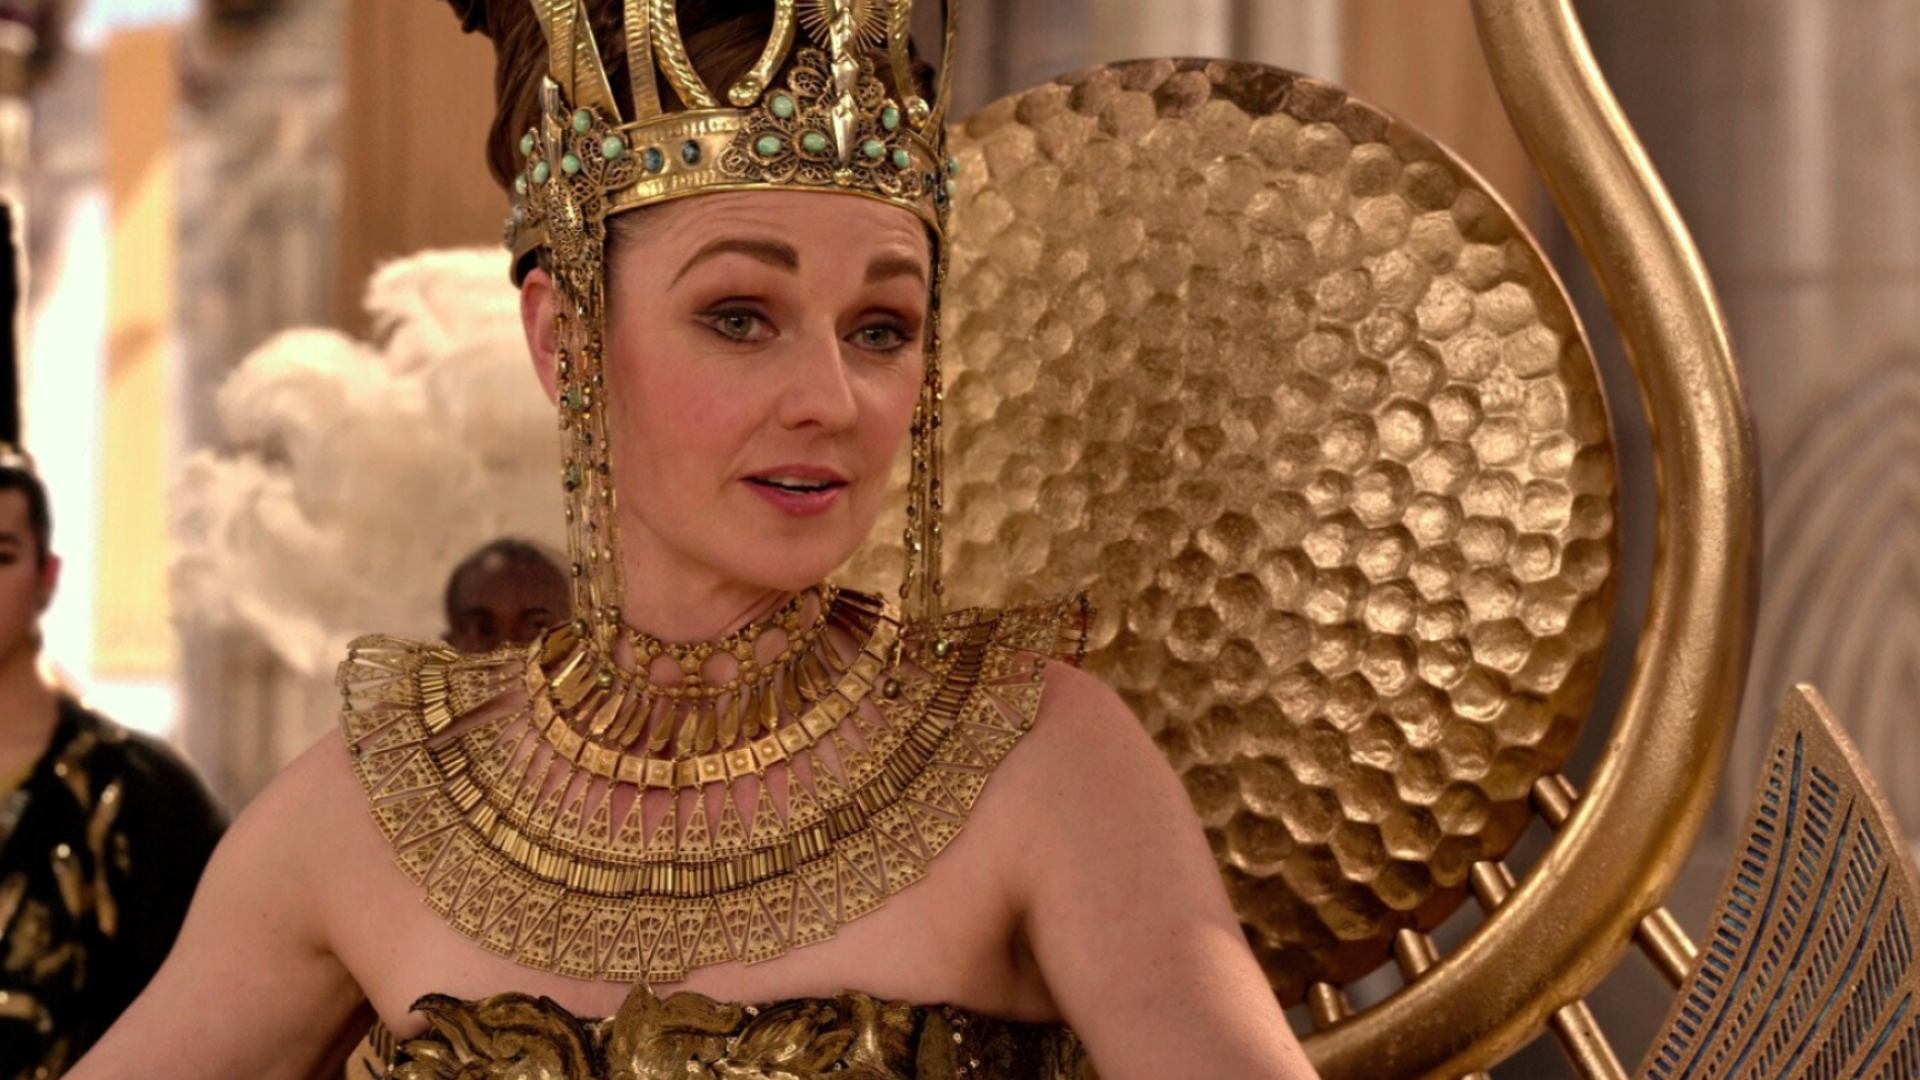 Gods of Egypt (Movie): Rachael Blake as Isis, The deity of health, marriage and wisdom, The wife of Osiris. 1920x1080 Full HD Wallpaper.